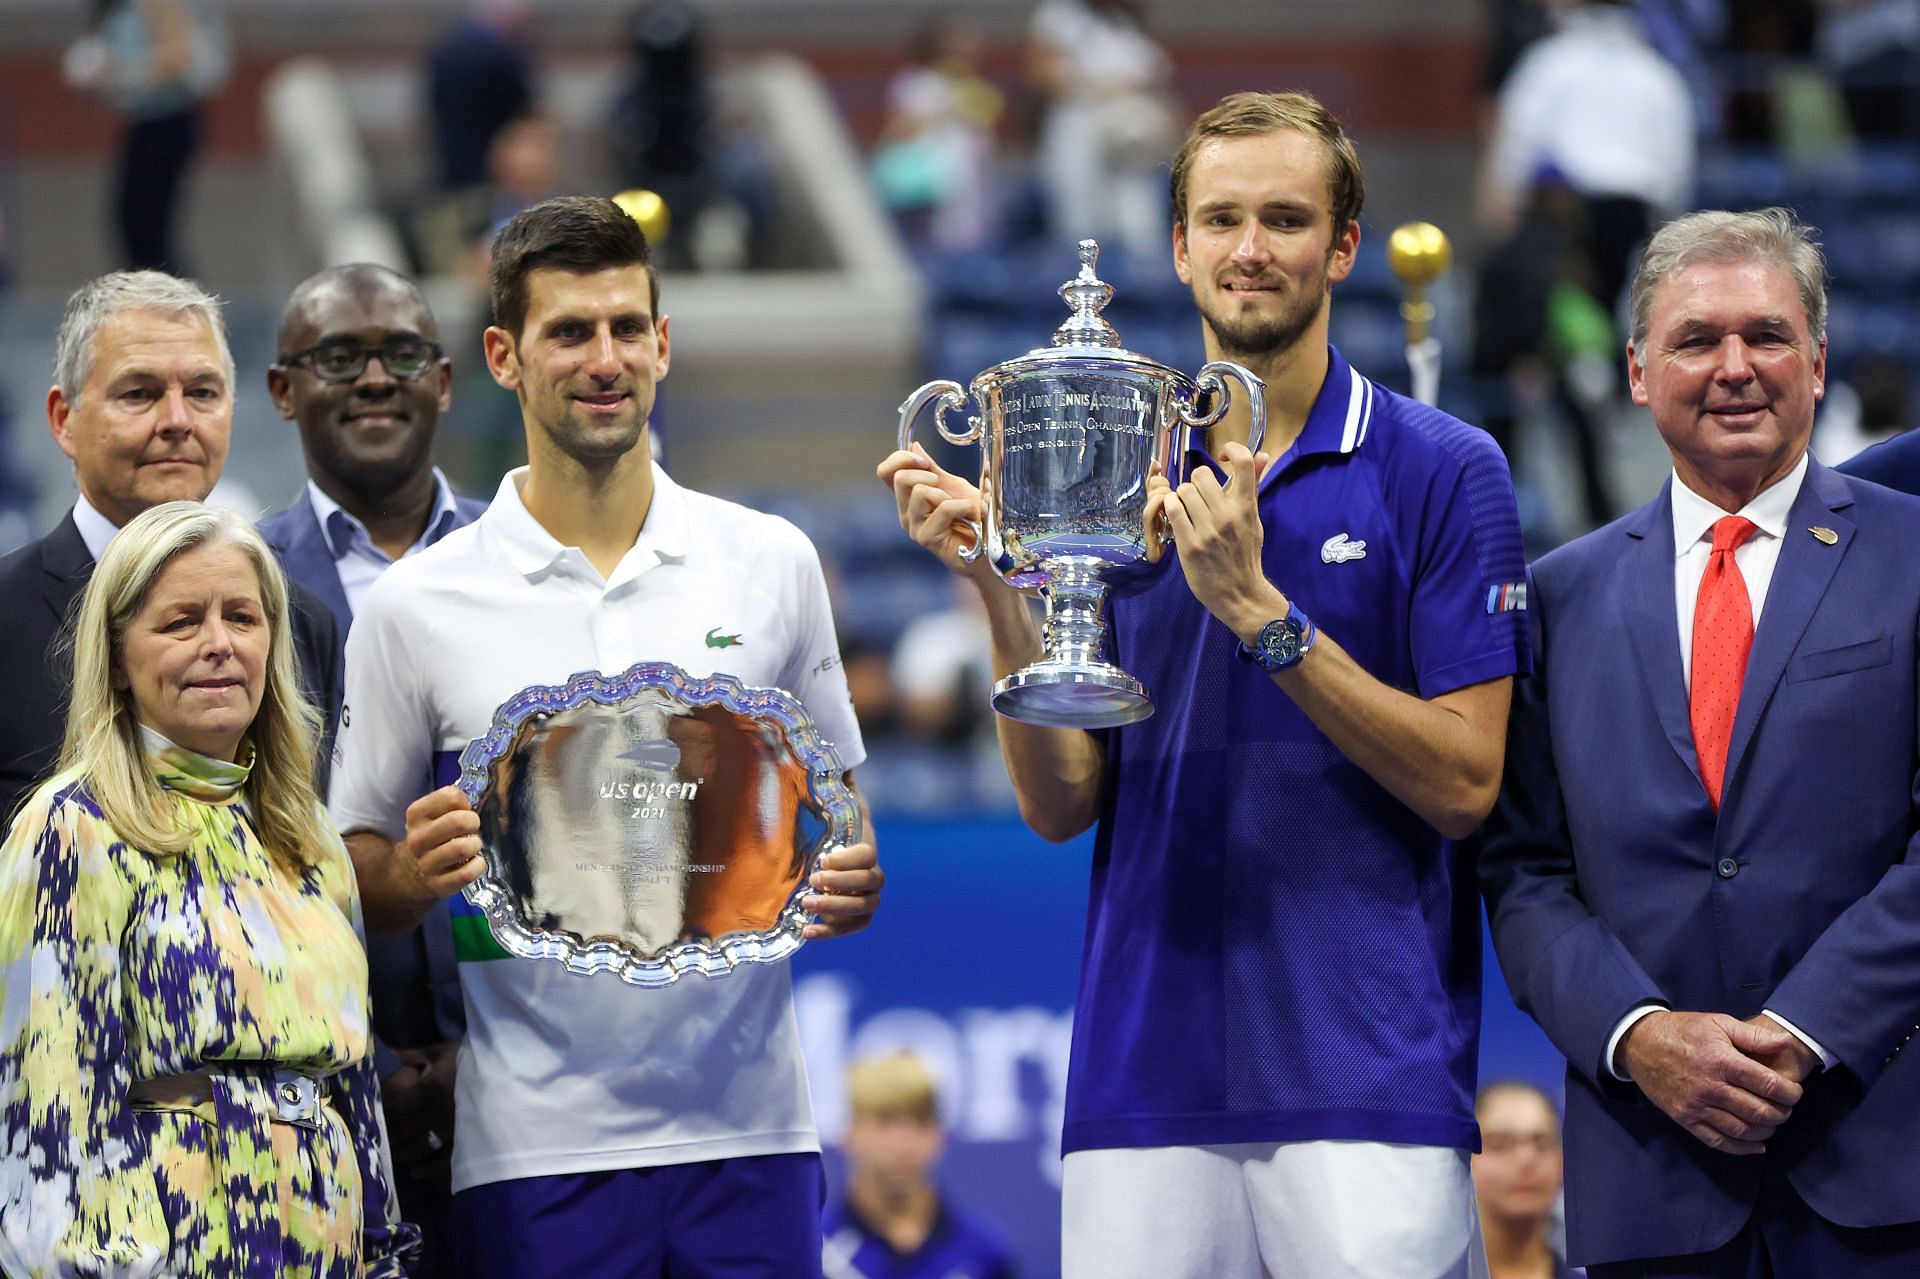 Medvedev with the 2021 US Open trophy while Djokovic flanked by runner-up Djokovic